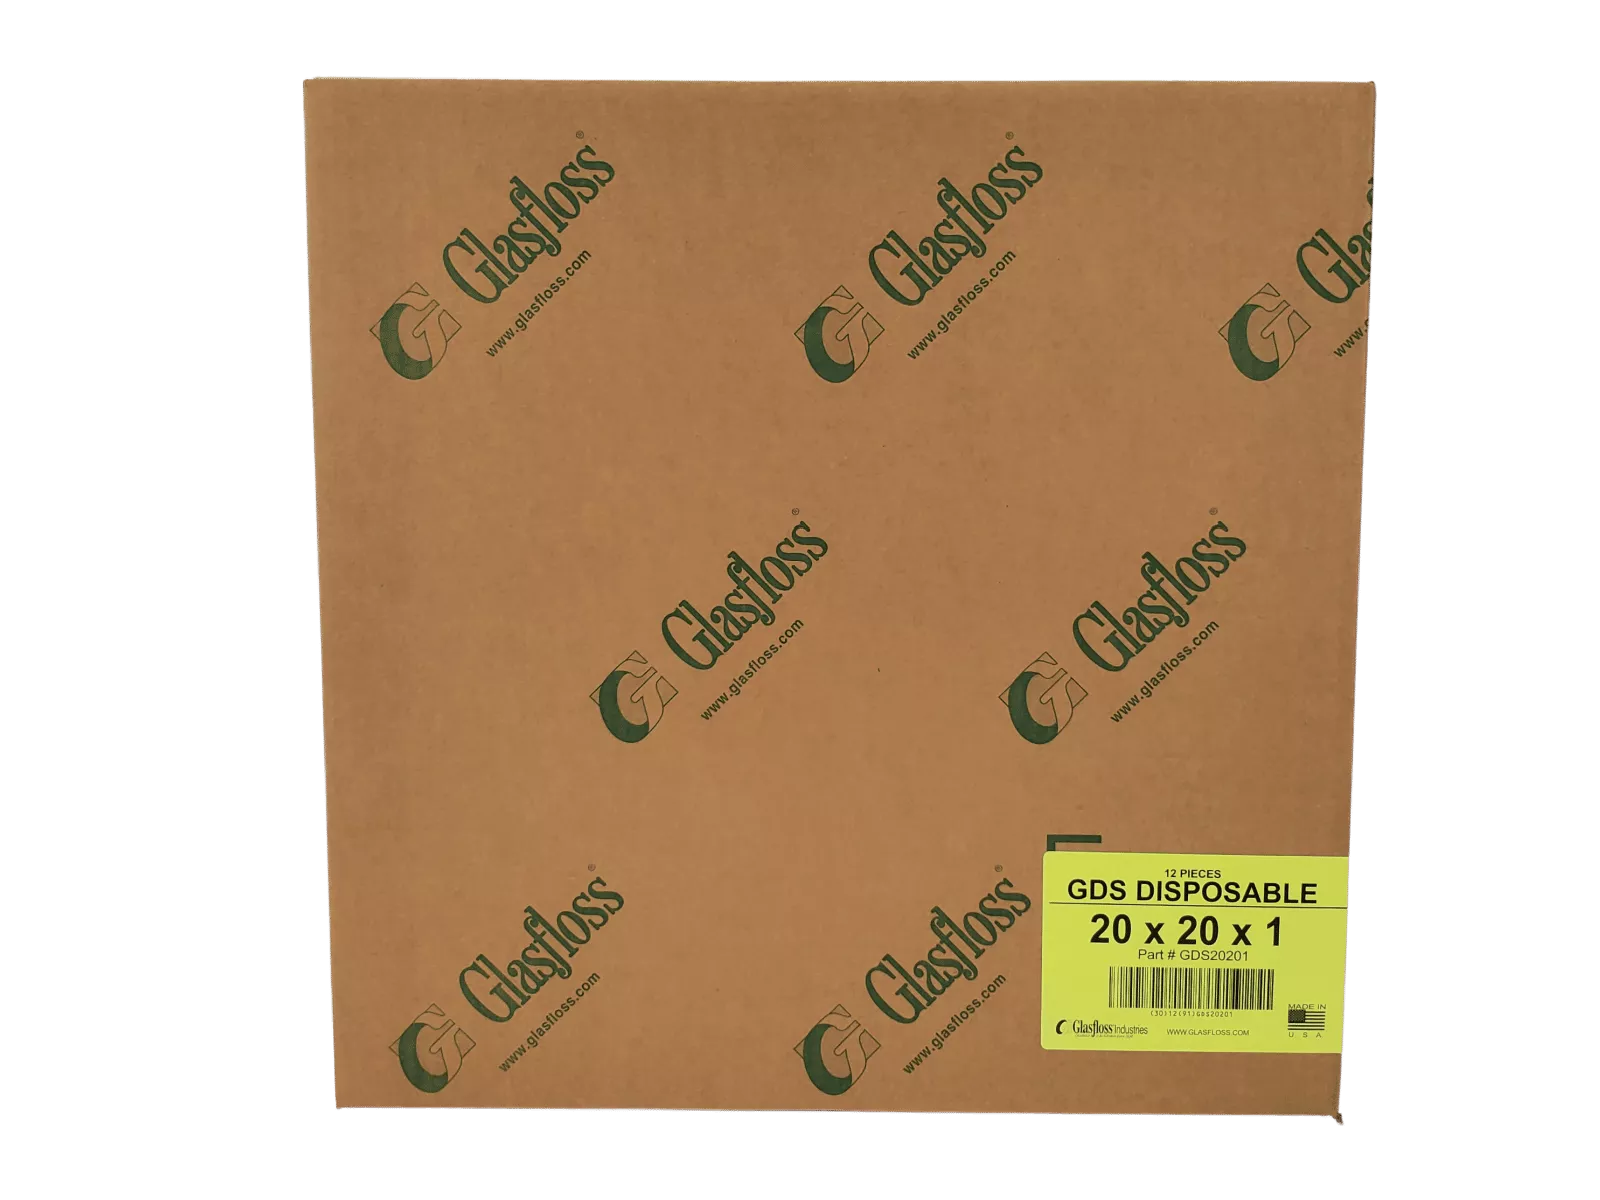 Glassfloss exhaust fan filter, a vital component for maintaining clean air during bedliner spraying.